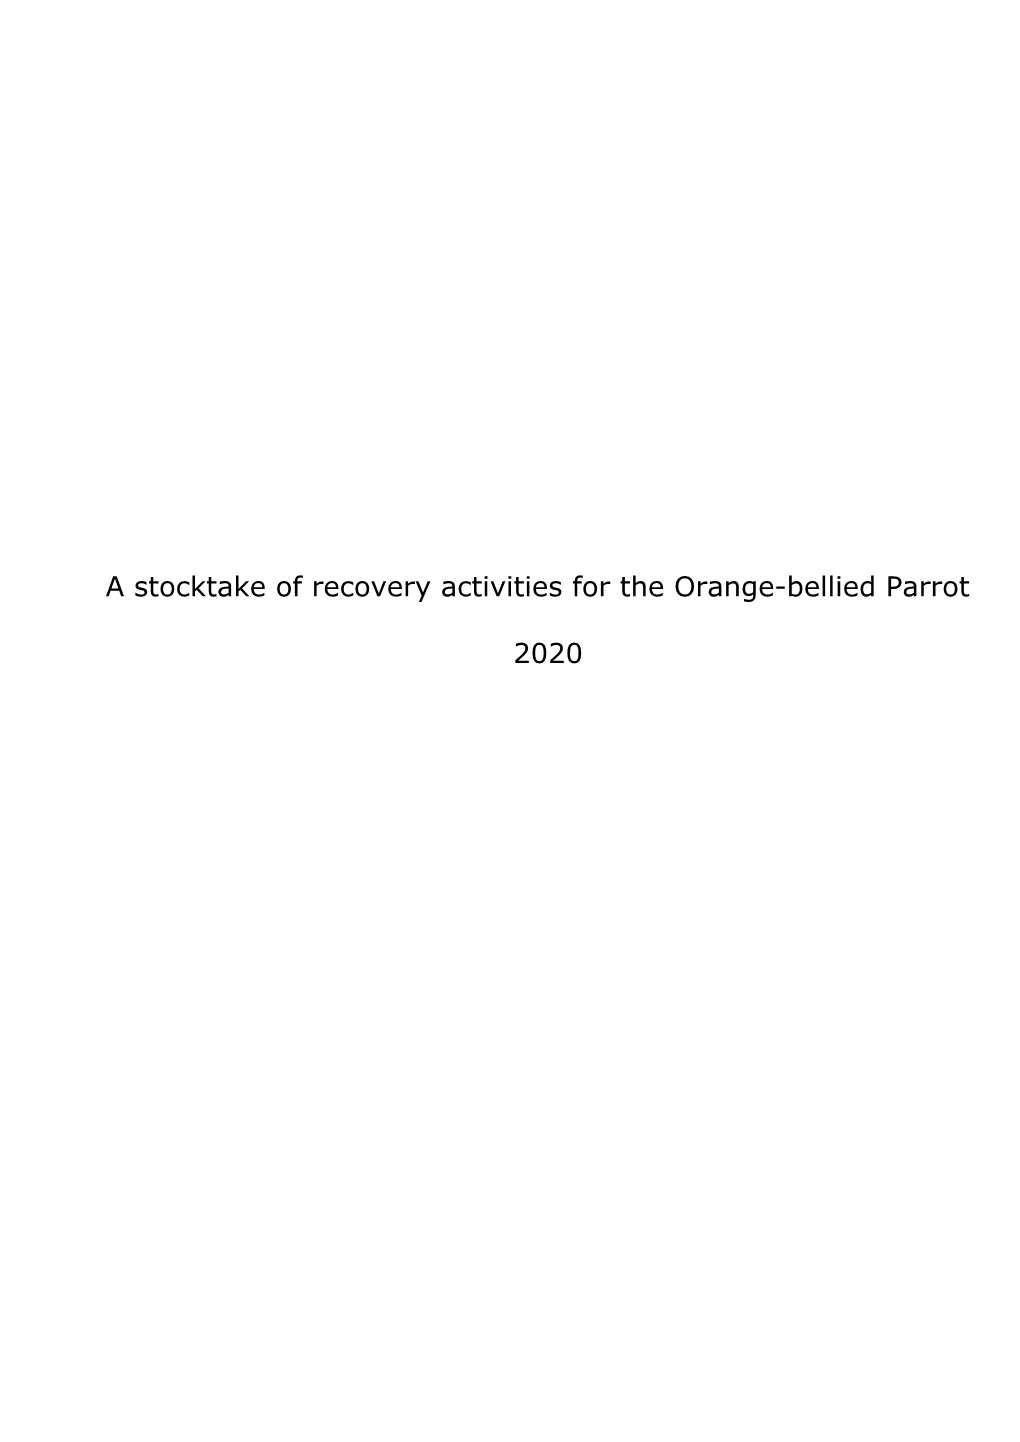 A Stocktake of Recovery Activities for the Orange-Bellied Parrot 2020